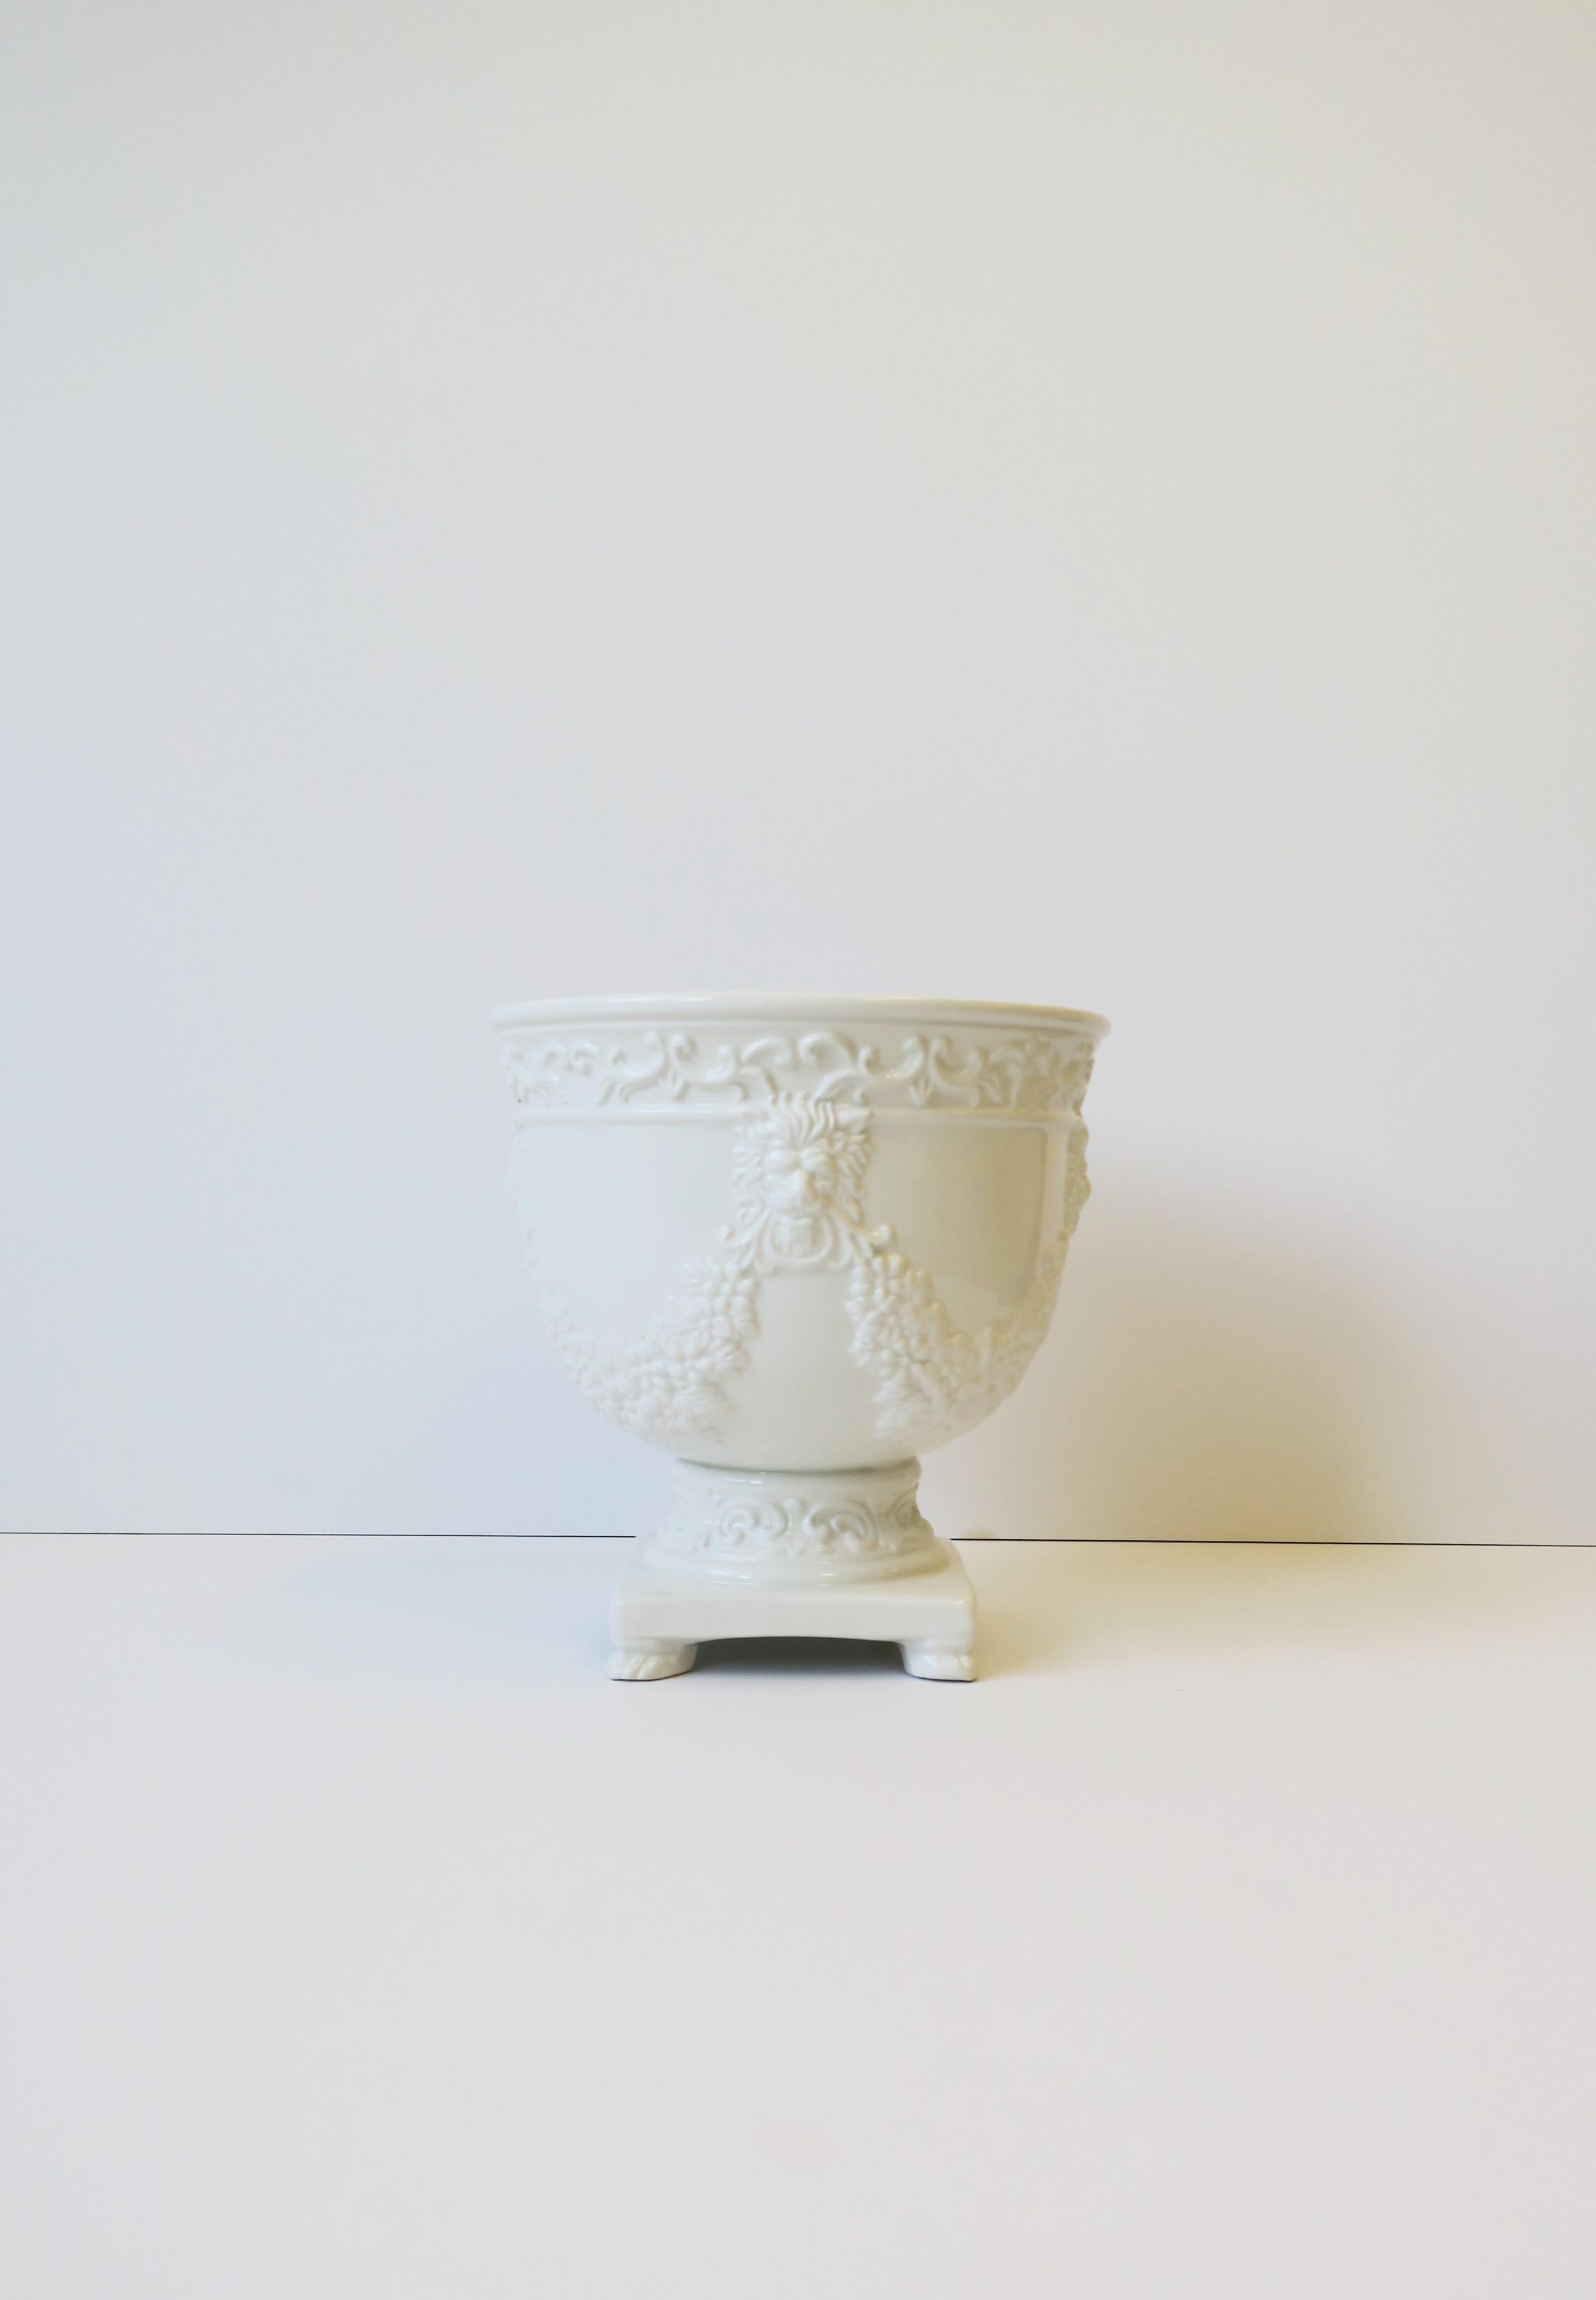 A beautiful Italian white ceramic Regency style planter cachepot jardinière plant pot holder by Mottahedeh, circa late-20th century. Beautiful with or without a plant or flowers. Piece was made in Italy. With maker's mark 